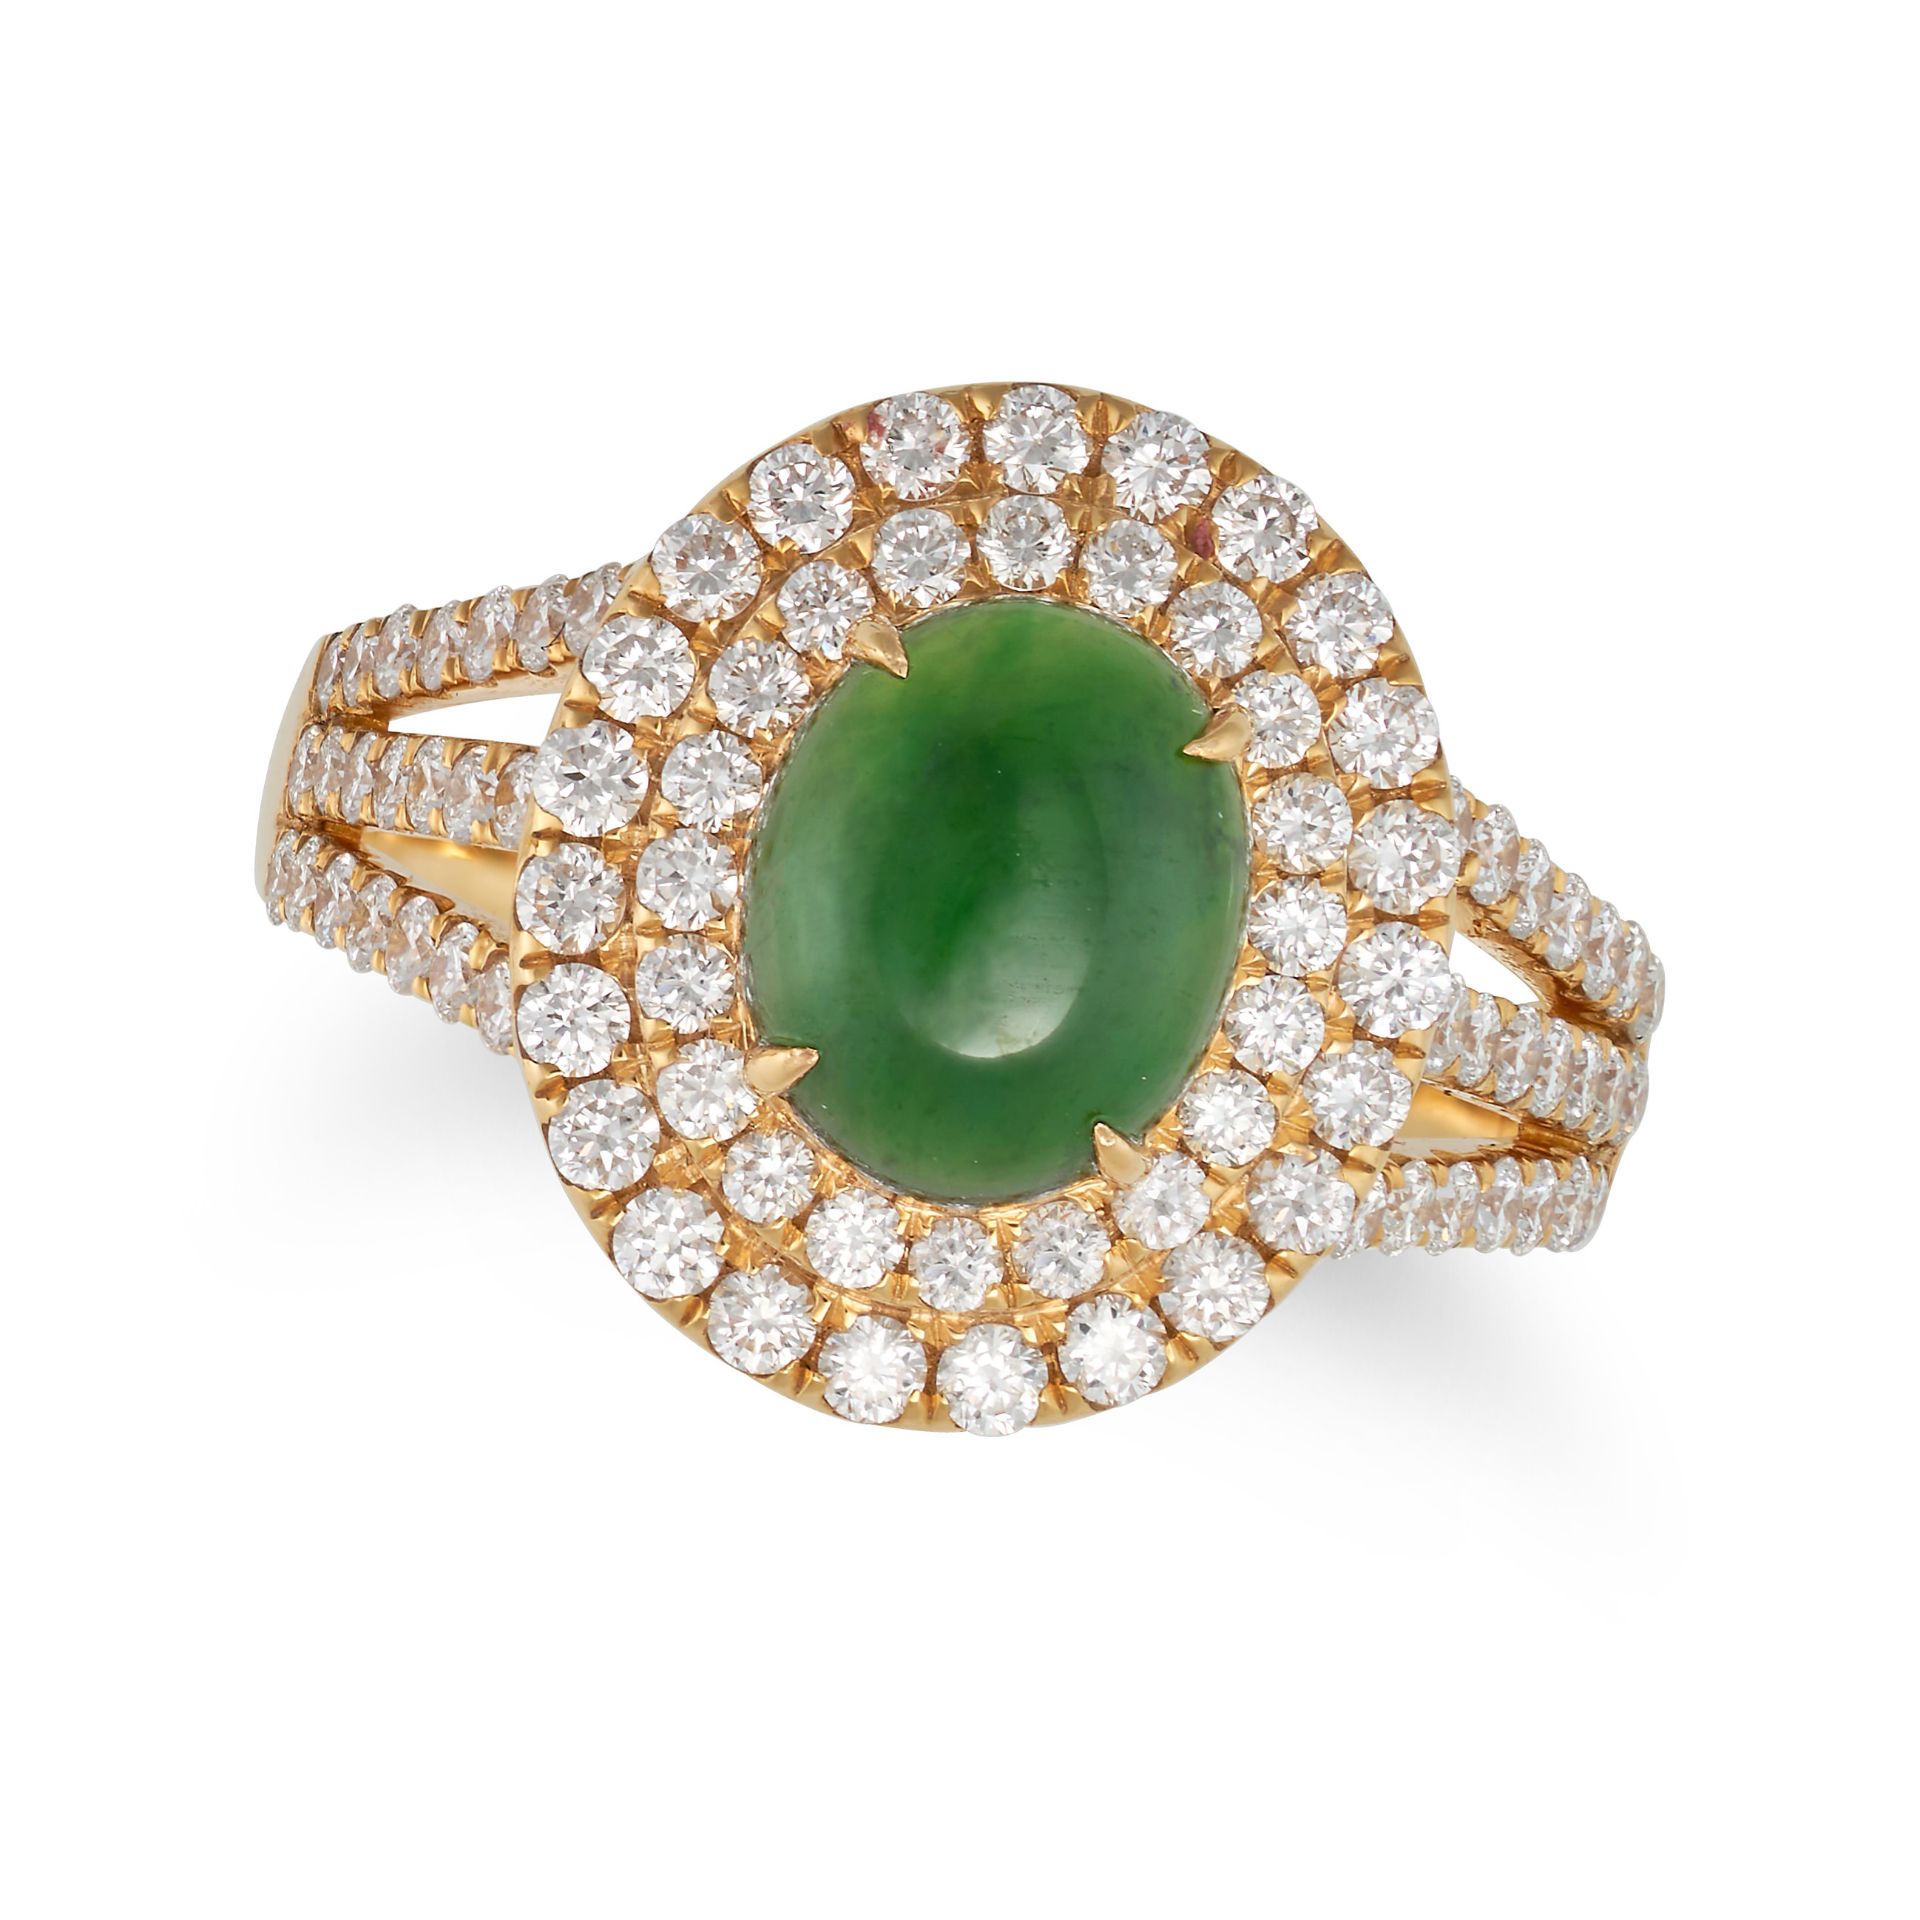 A JADEITE JADE AND DIAMOND RING in 18ct yellow gold, set with an oval cabochon jadeite jade of 1....